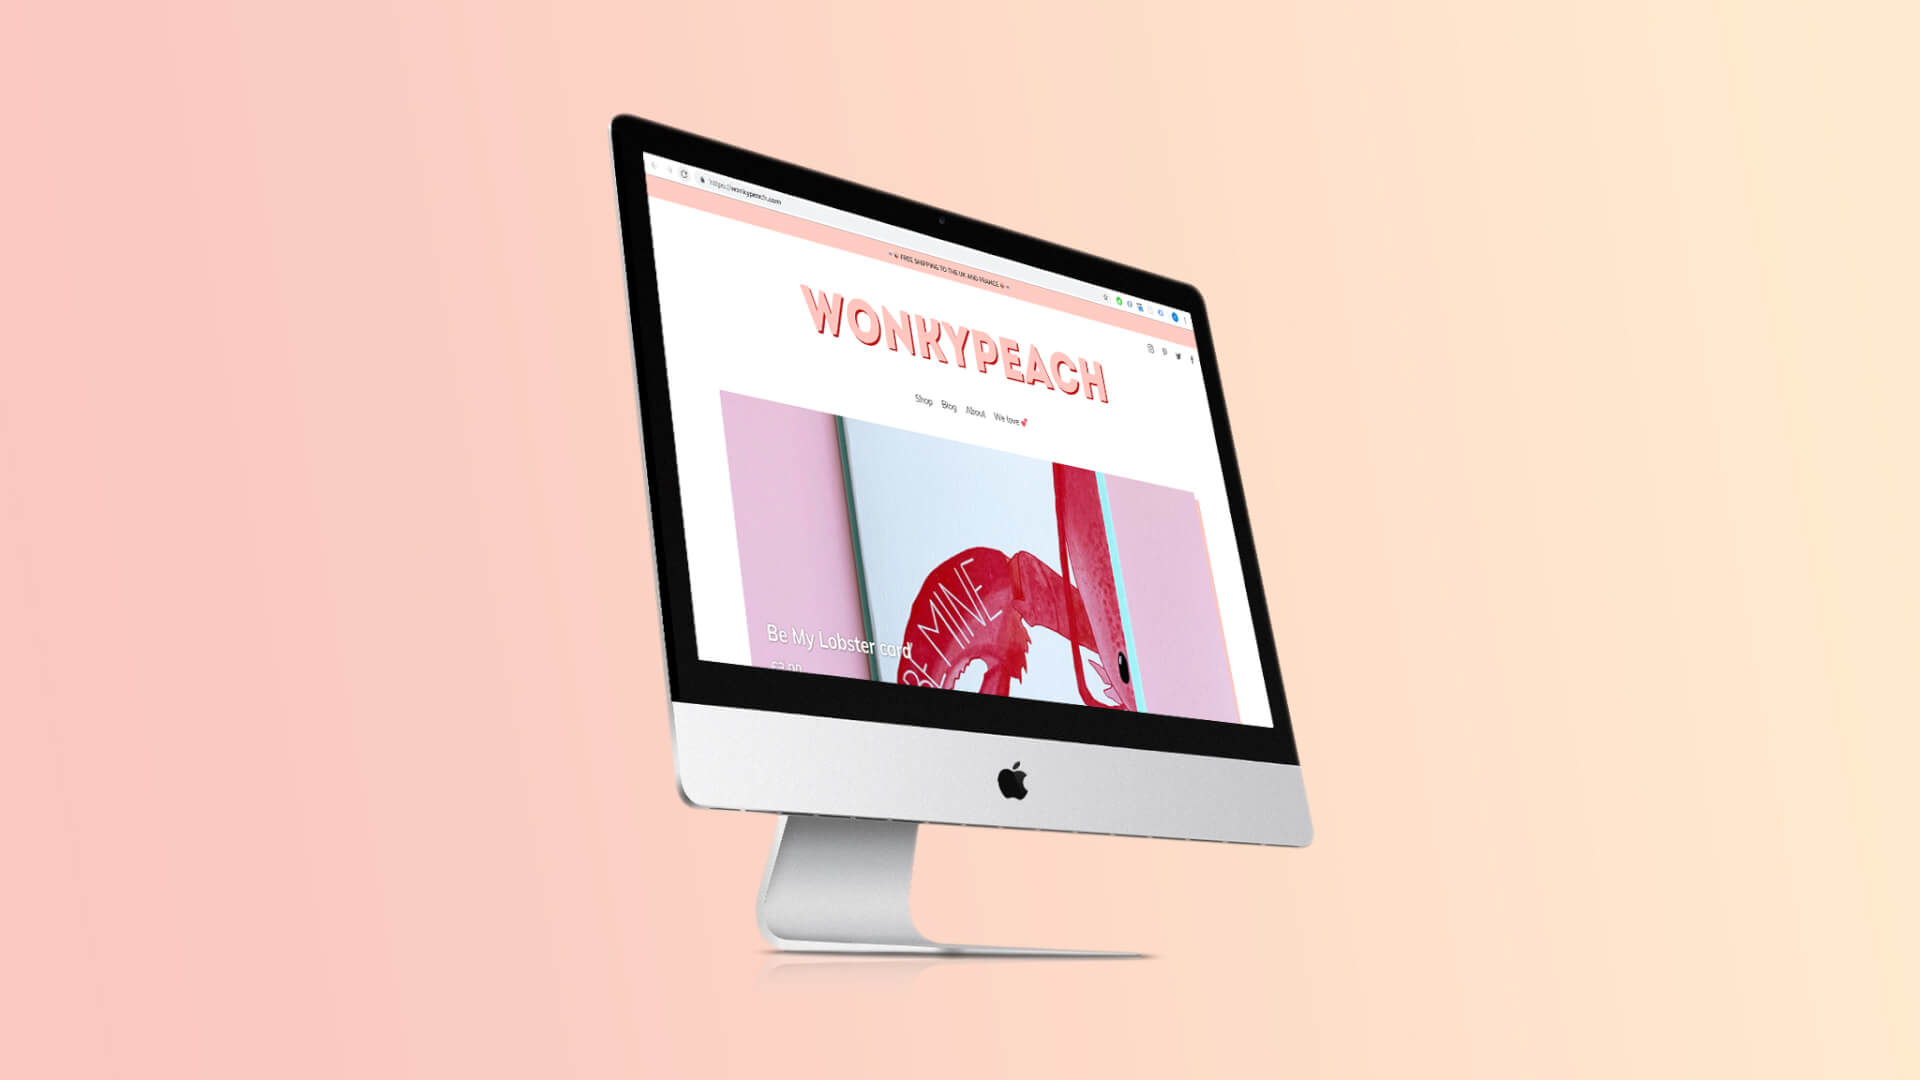 An image showing the new Wonkypeach website on an Imac. The page showing is the homepage.